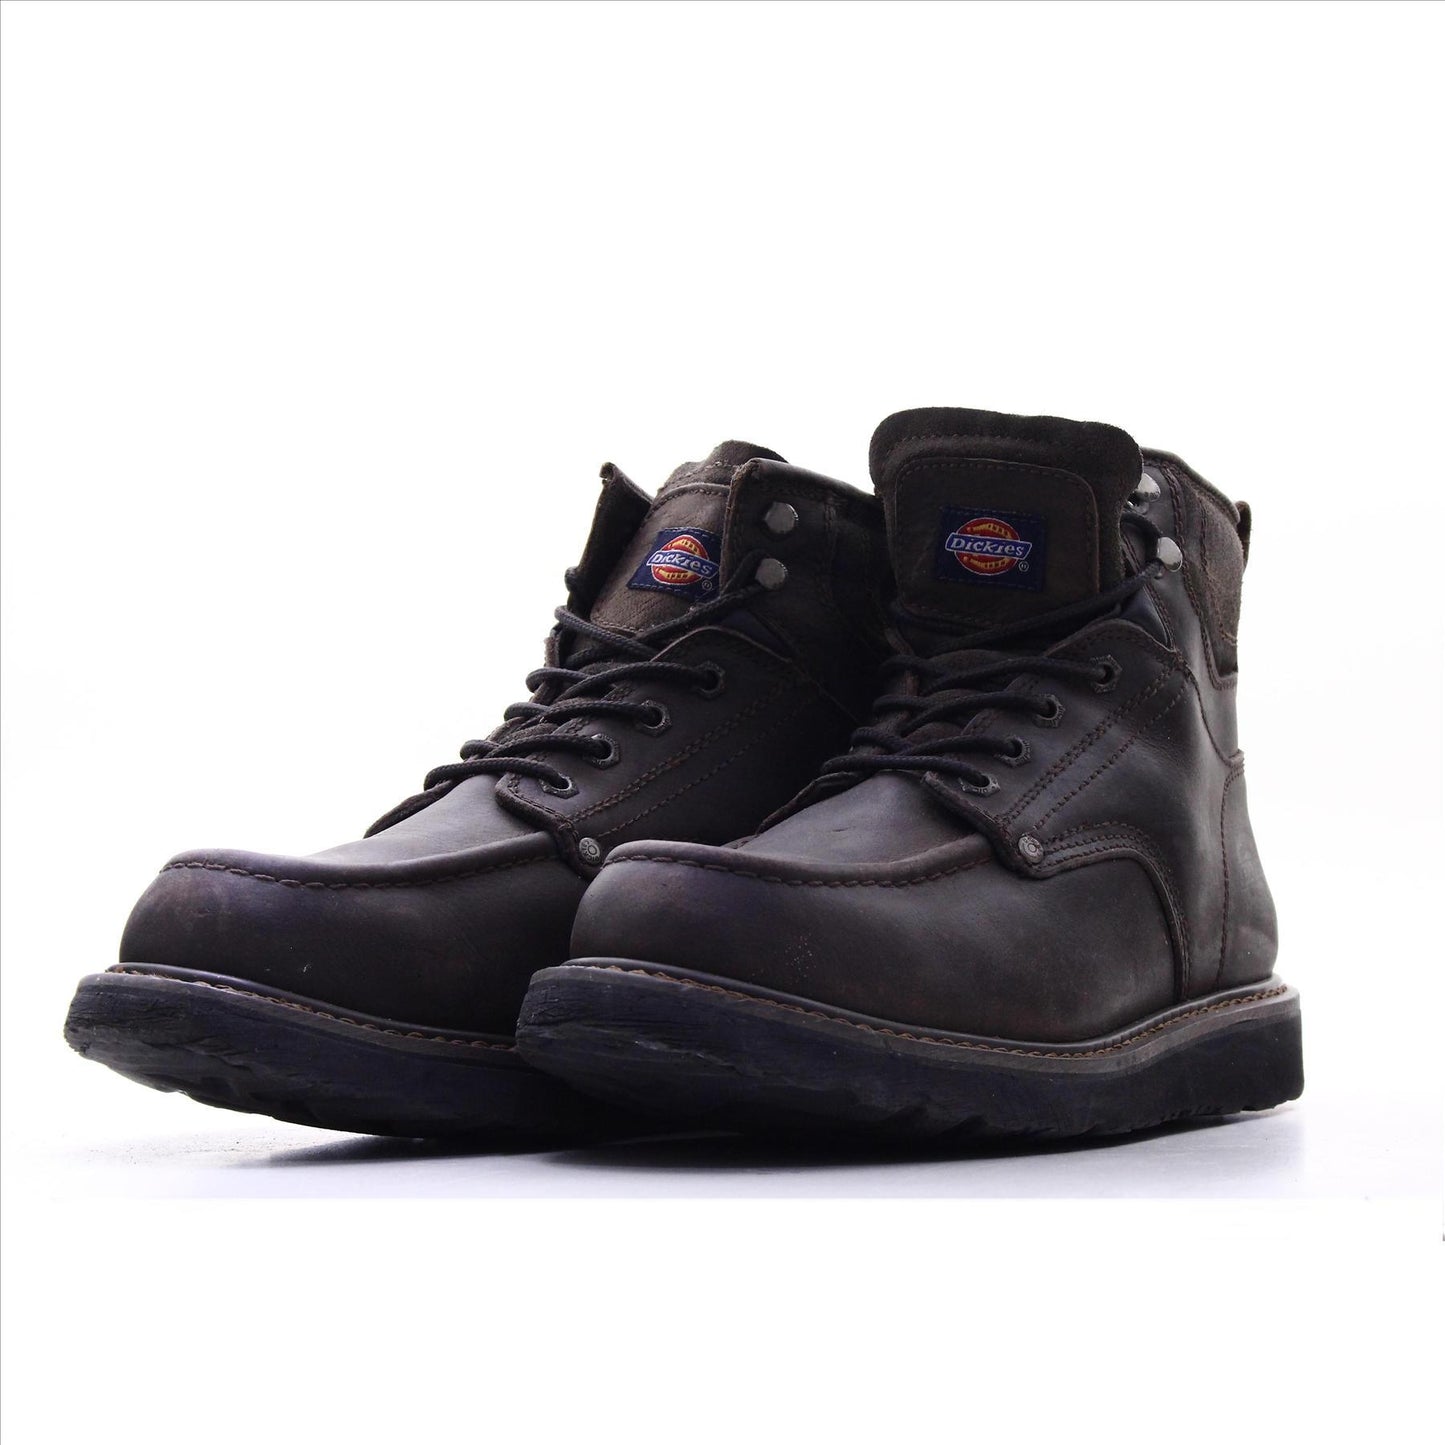 Dickies Steel Toe Safety Boots